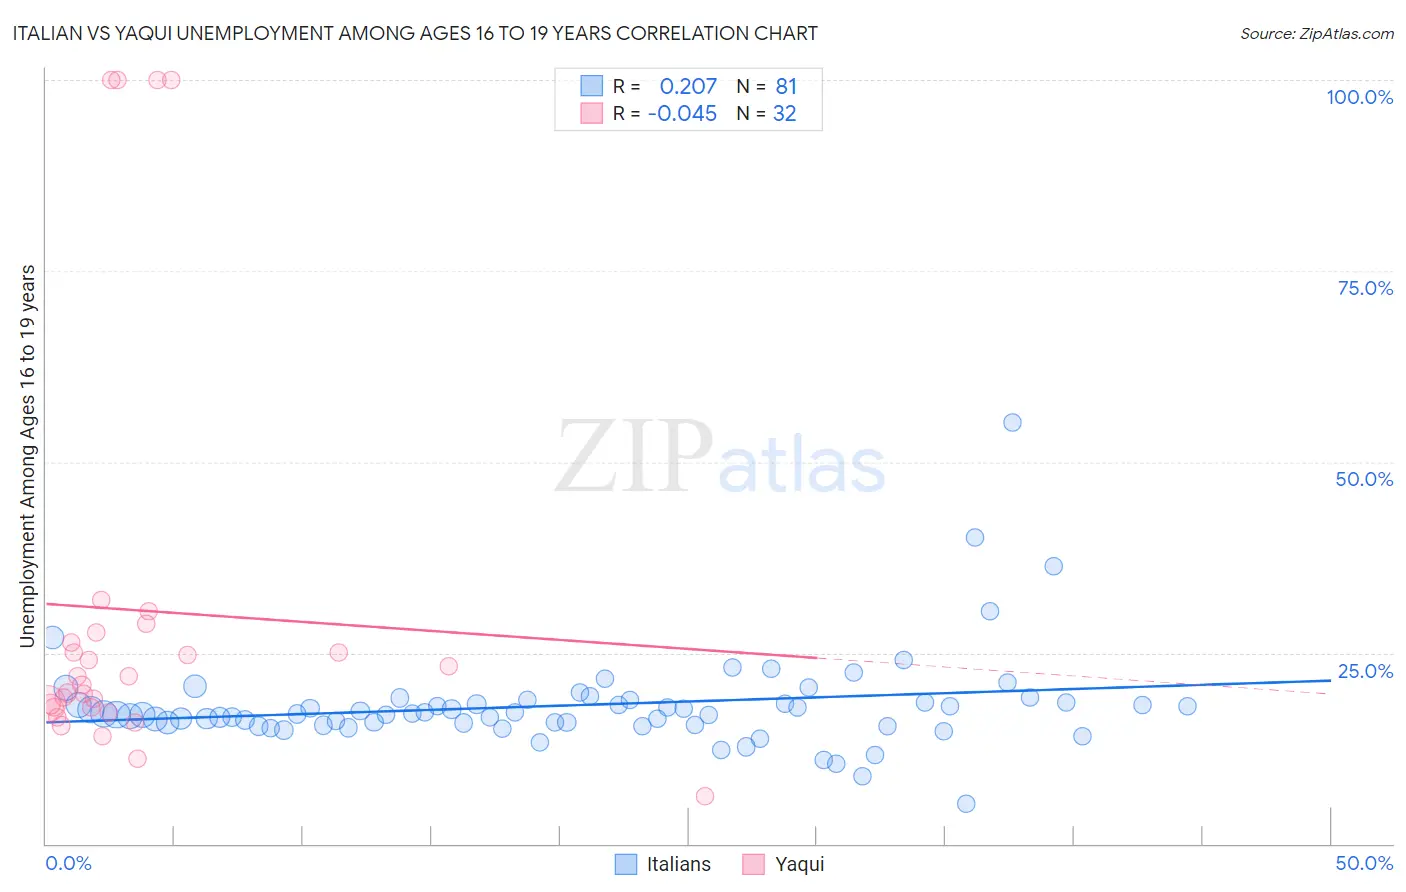 Italian vs Yaqui Unemployment Among Ages 16 to 19 years